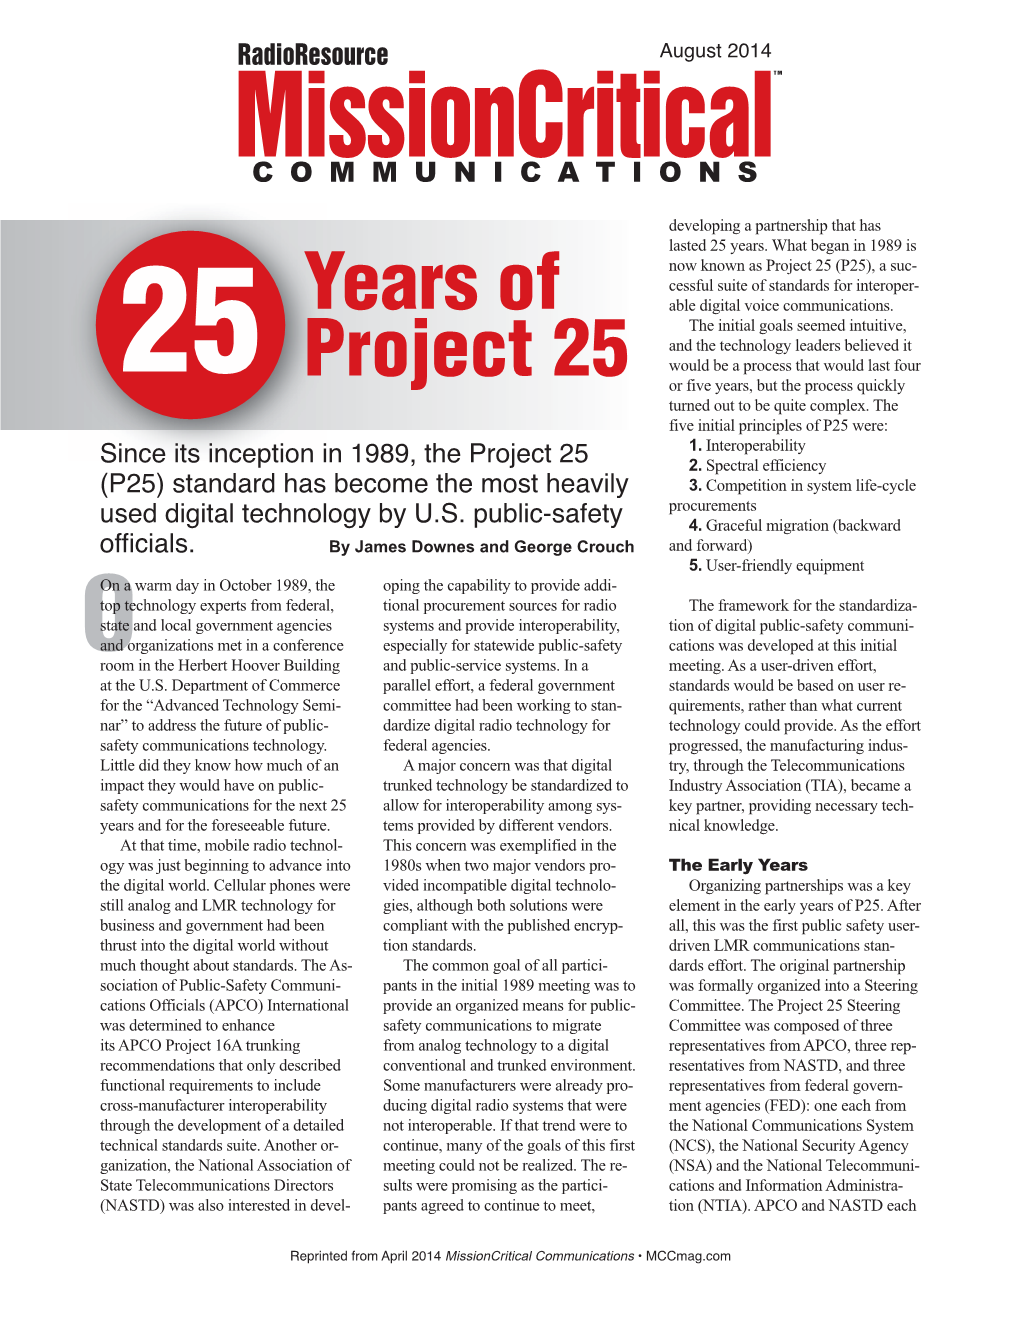 25 Years of Project 25